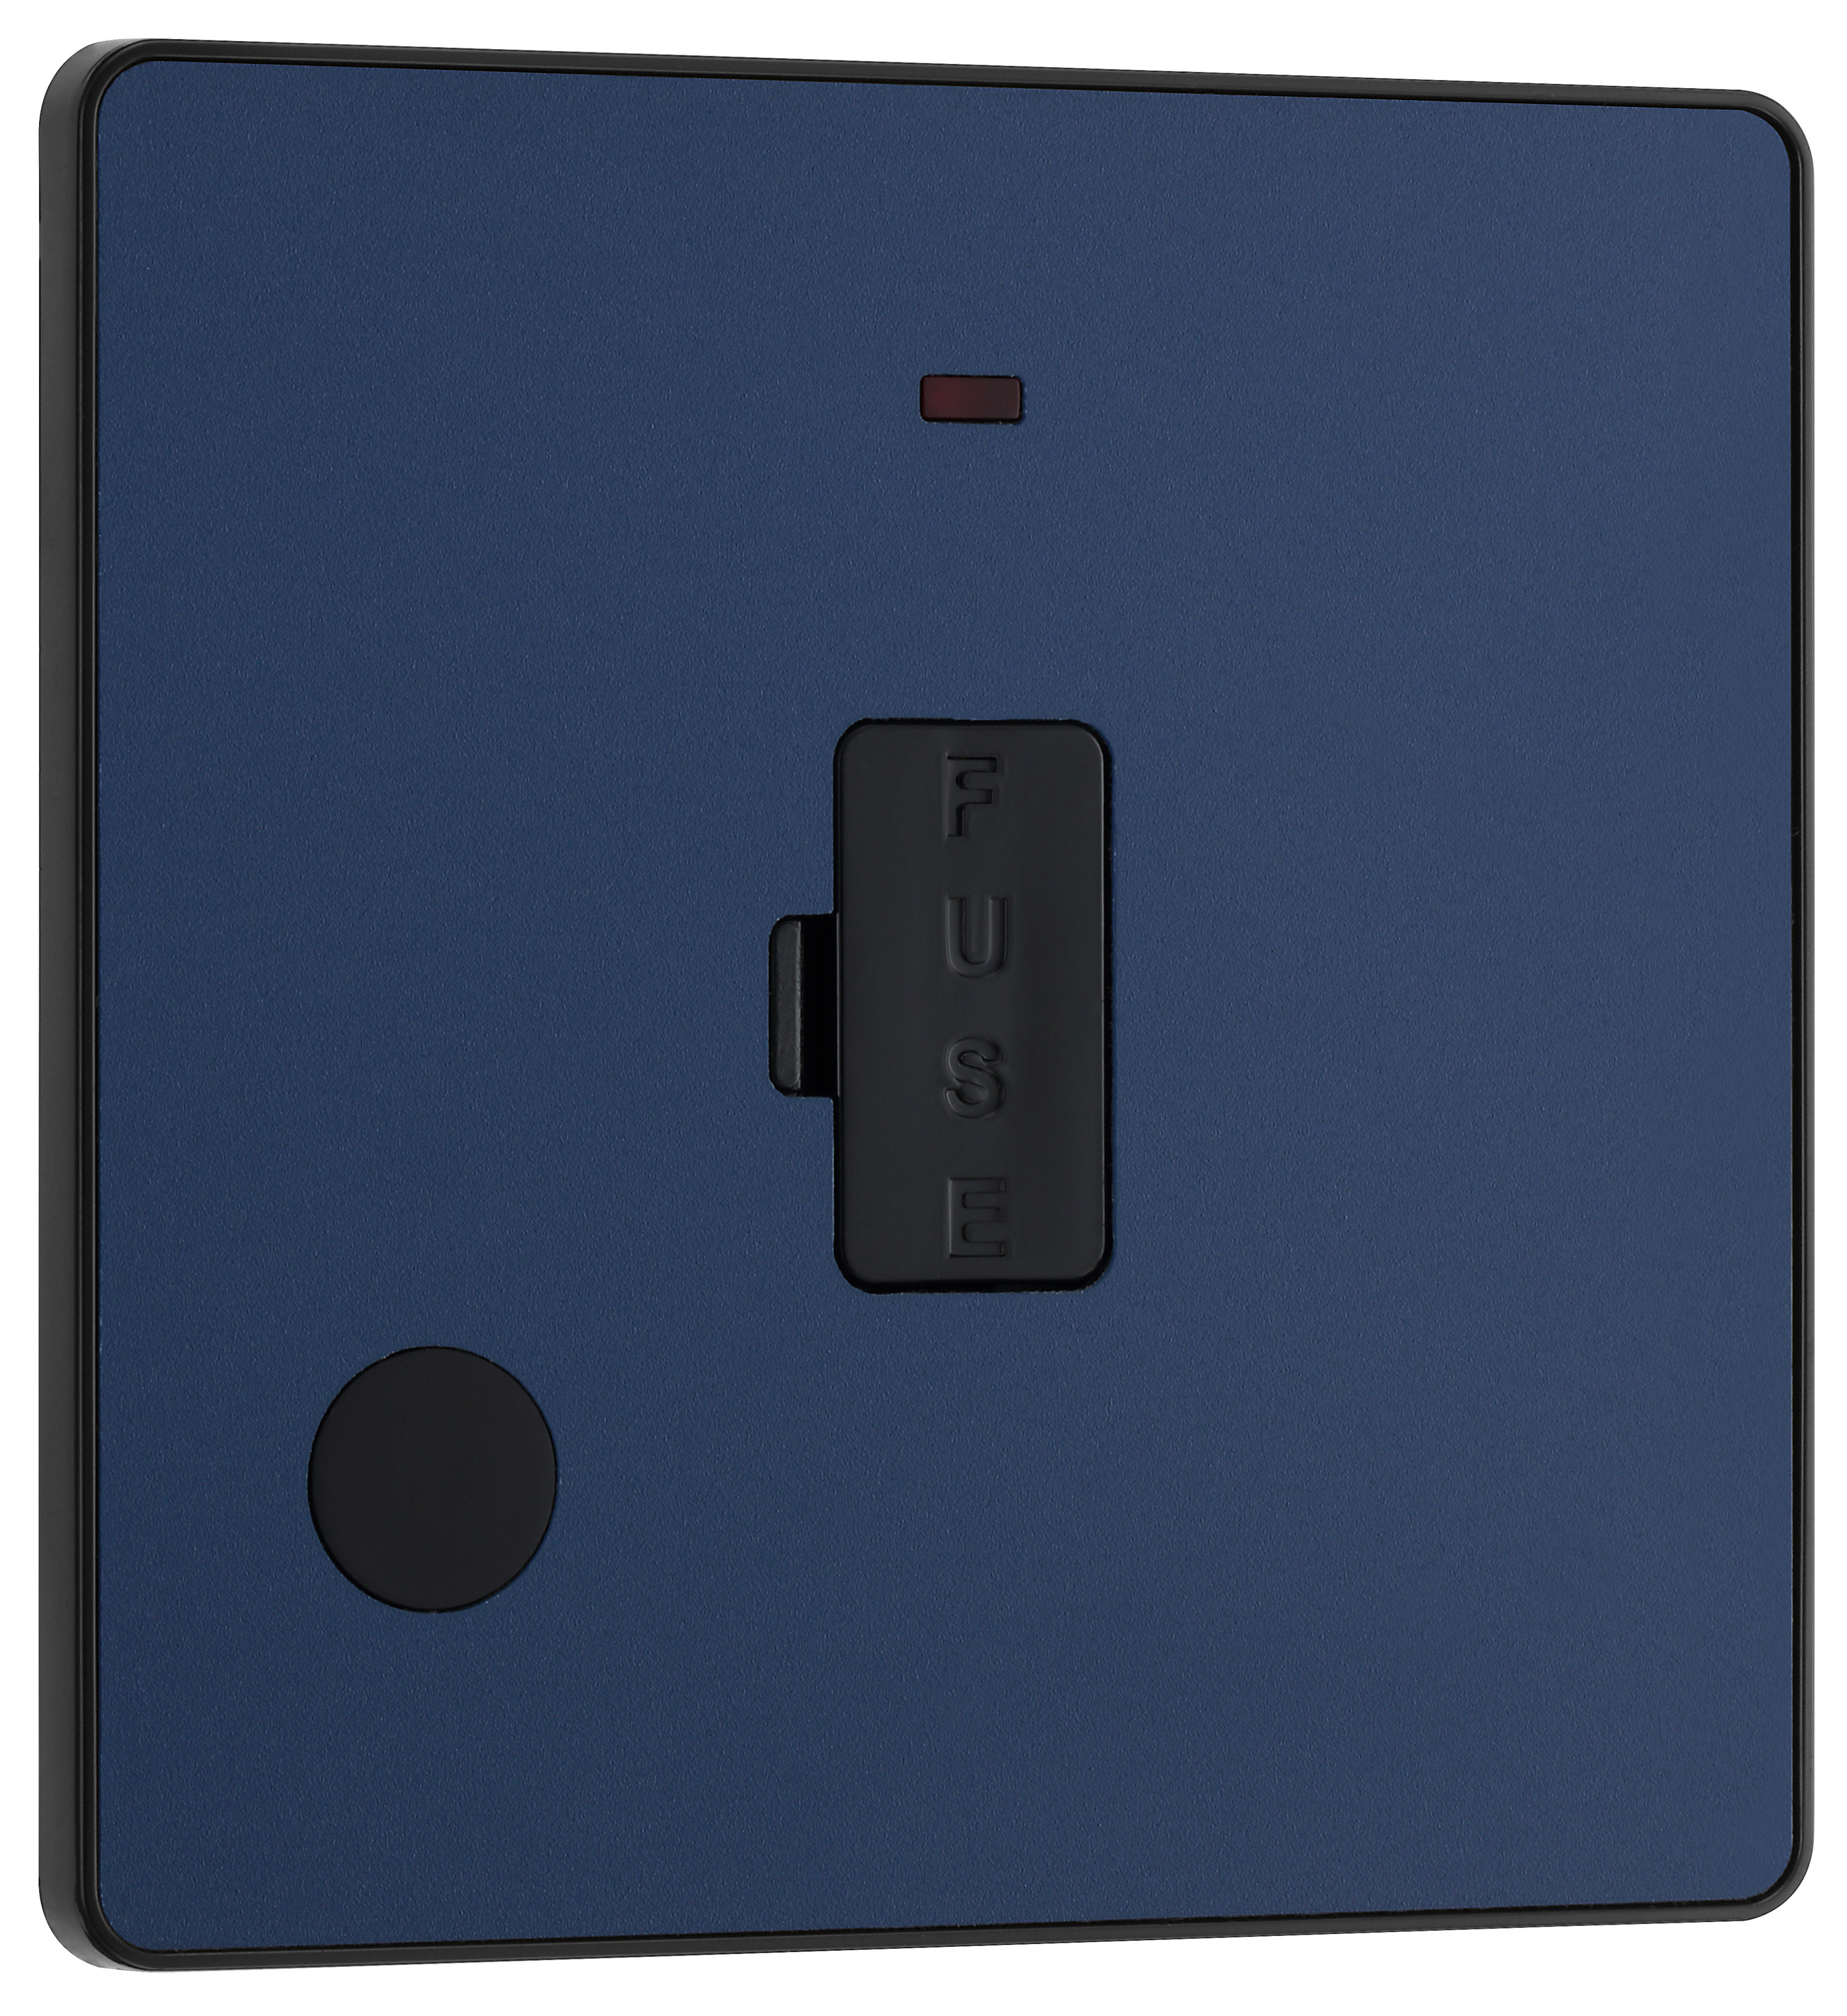 Image of BG Evolve Matt Blue 13A Unswitched Fused Connection Unit with Power Led Indicator & Flex Outlet